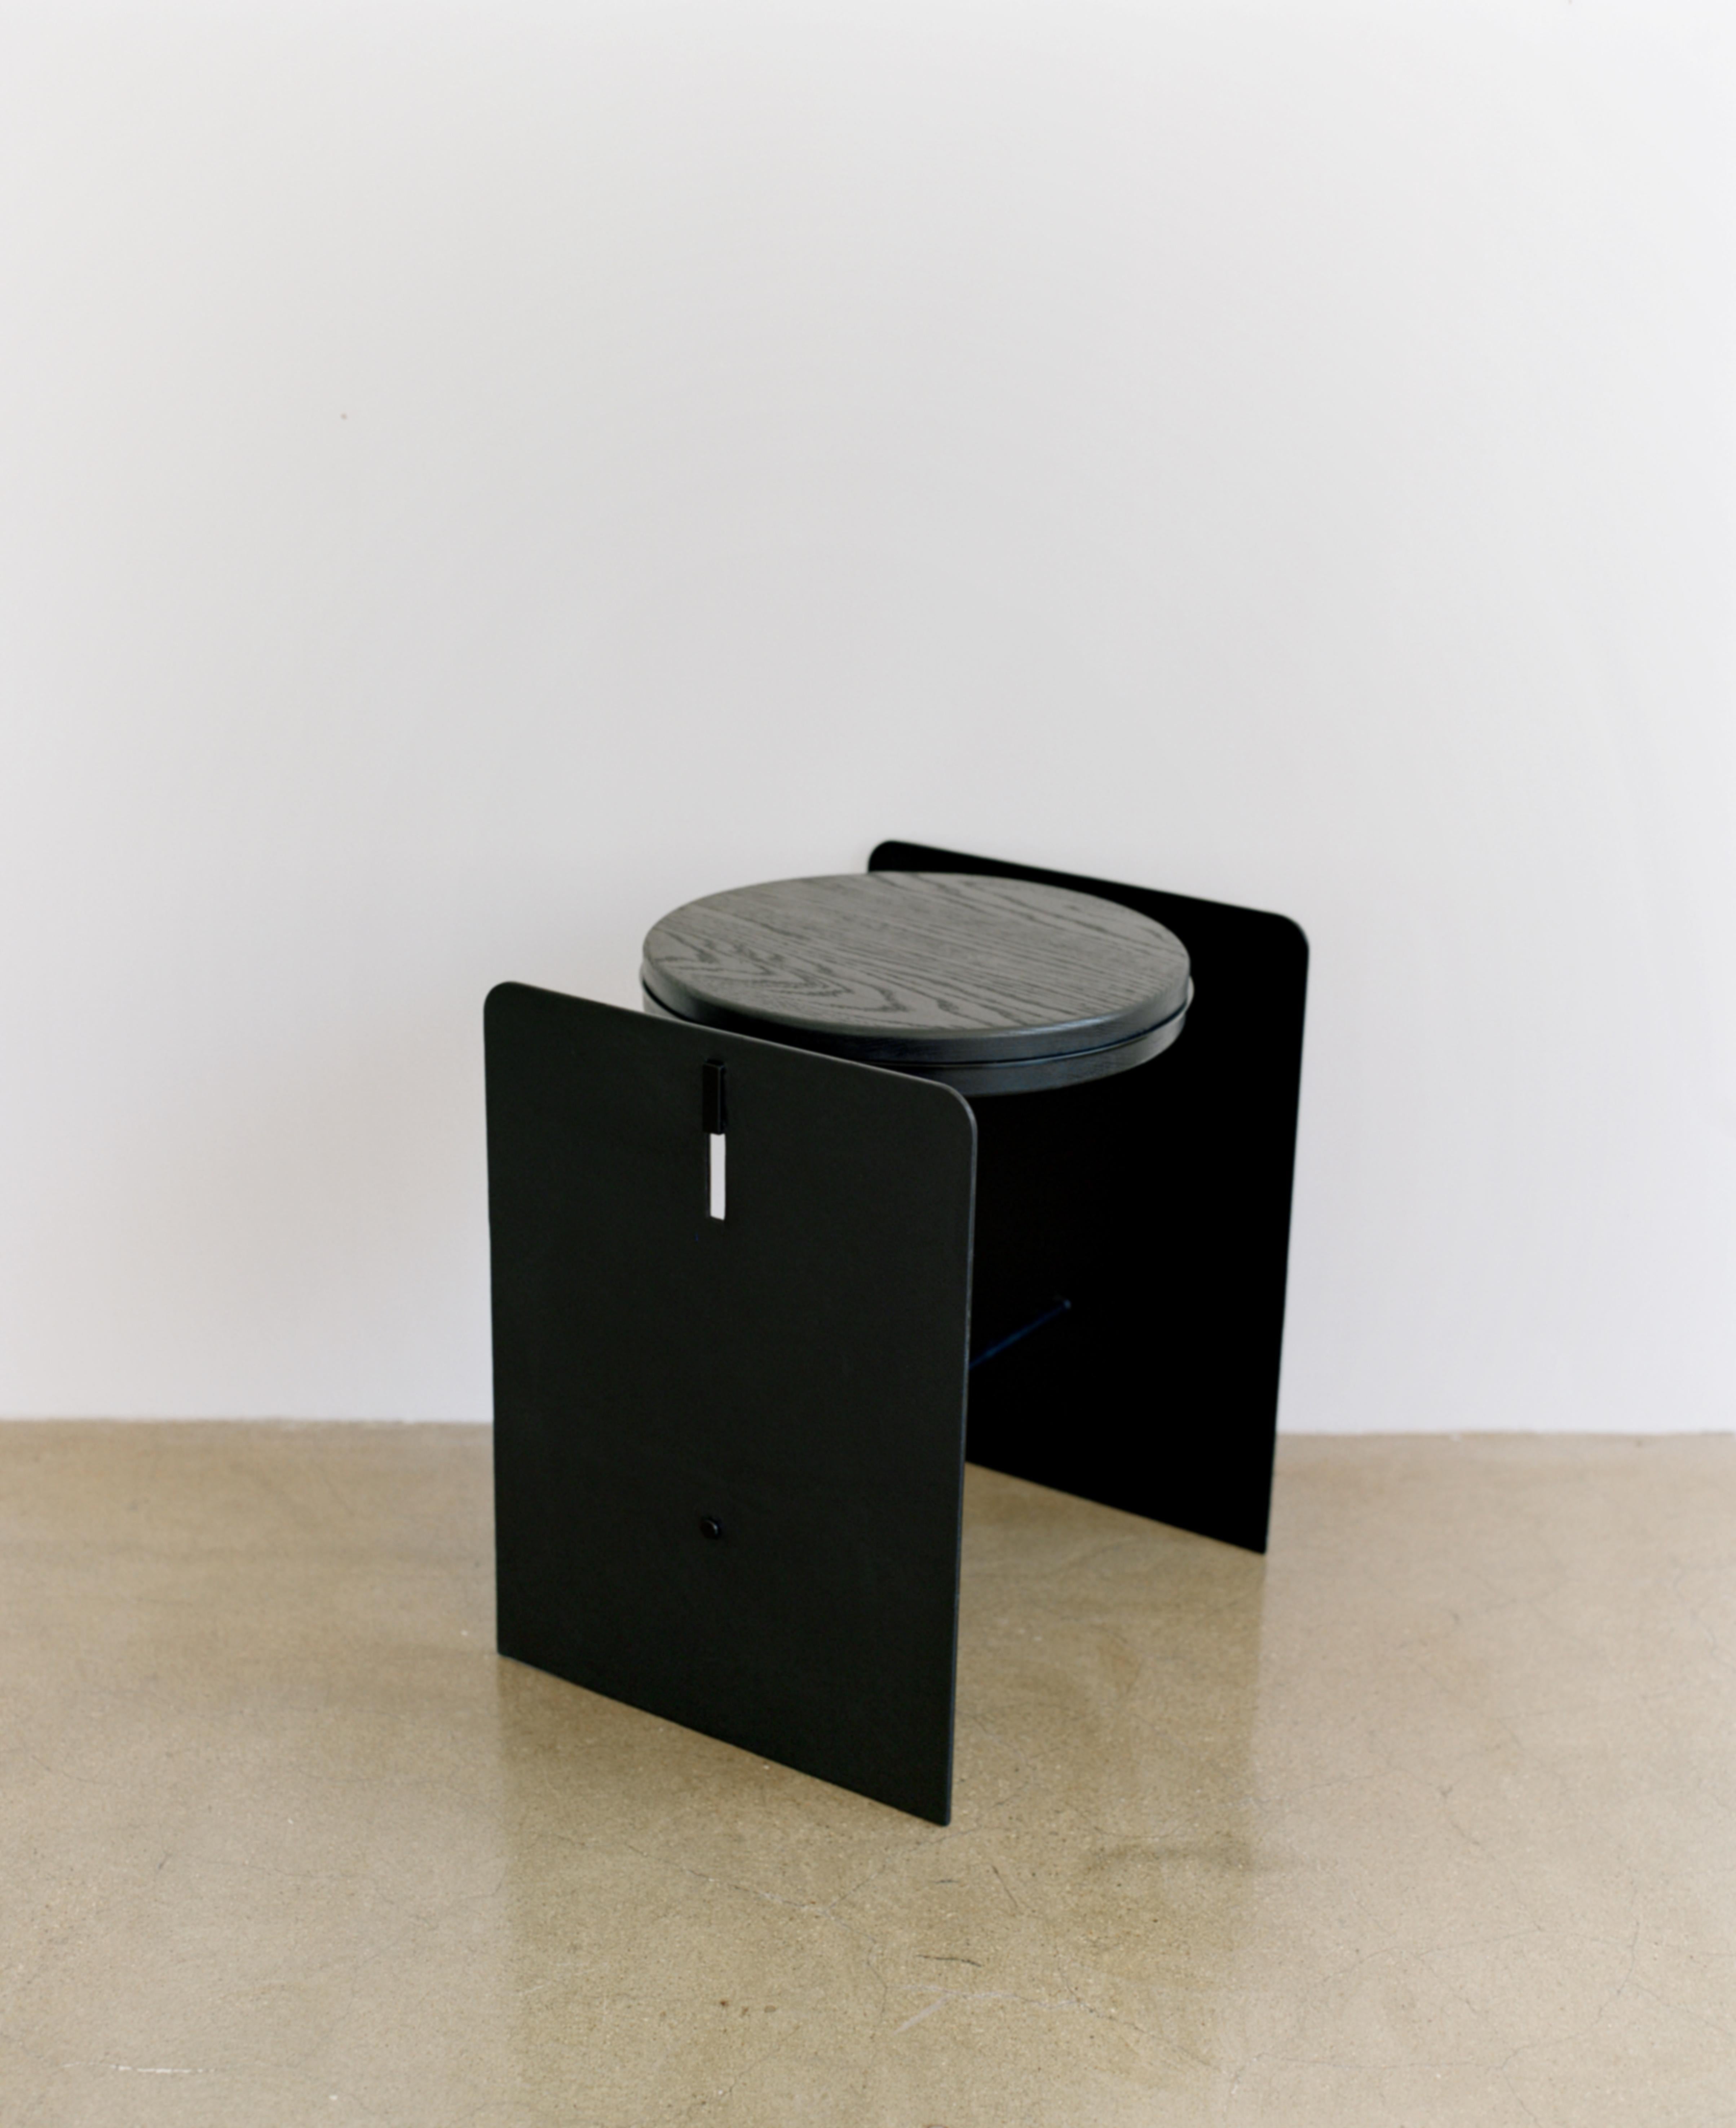 Building blocks double duty side table or stool: A round compositional side table could also function as a stool, designed with minimal form, reduced the unnecessary lines. Focus on different volume of materials.

Building blocks collection
A set